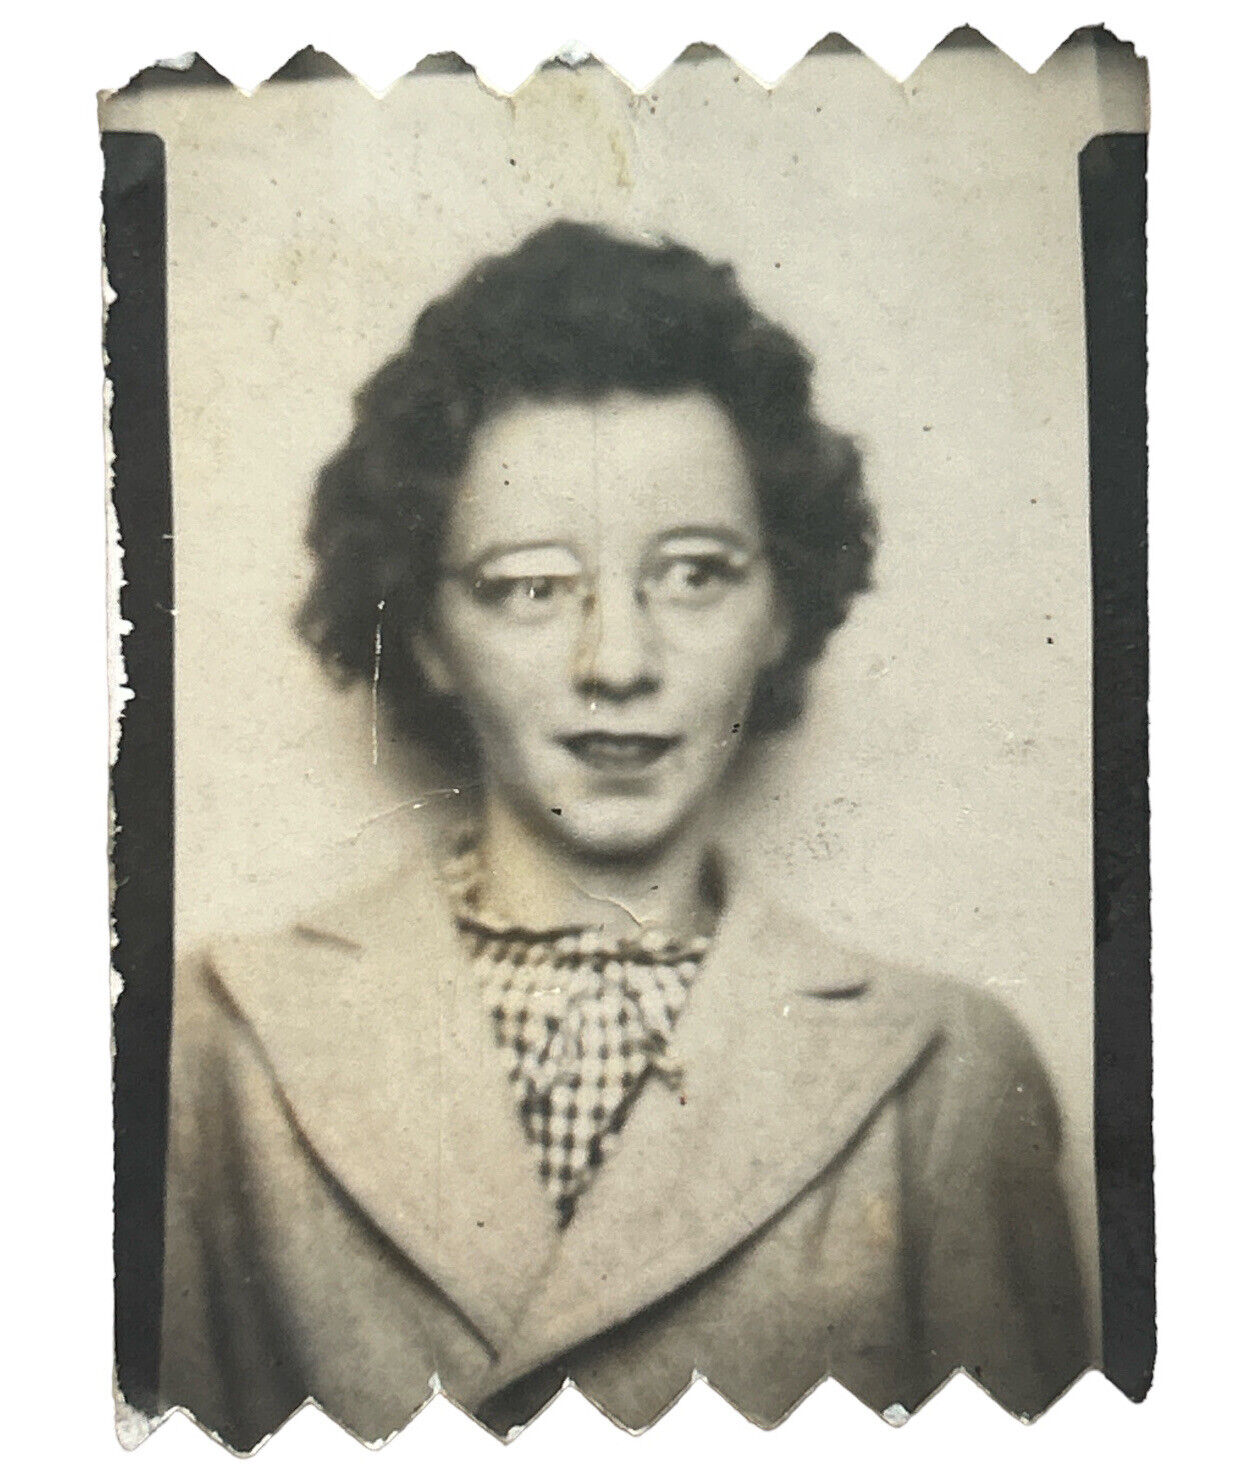 Cute 1940s Woman Wearing Glasses Vintage Arcade Photo Booth Portrait